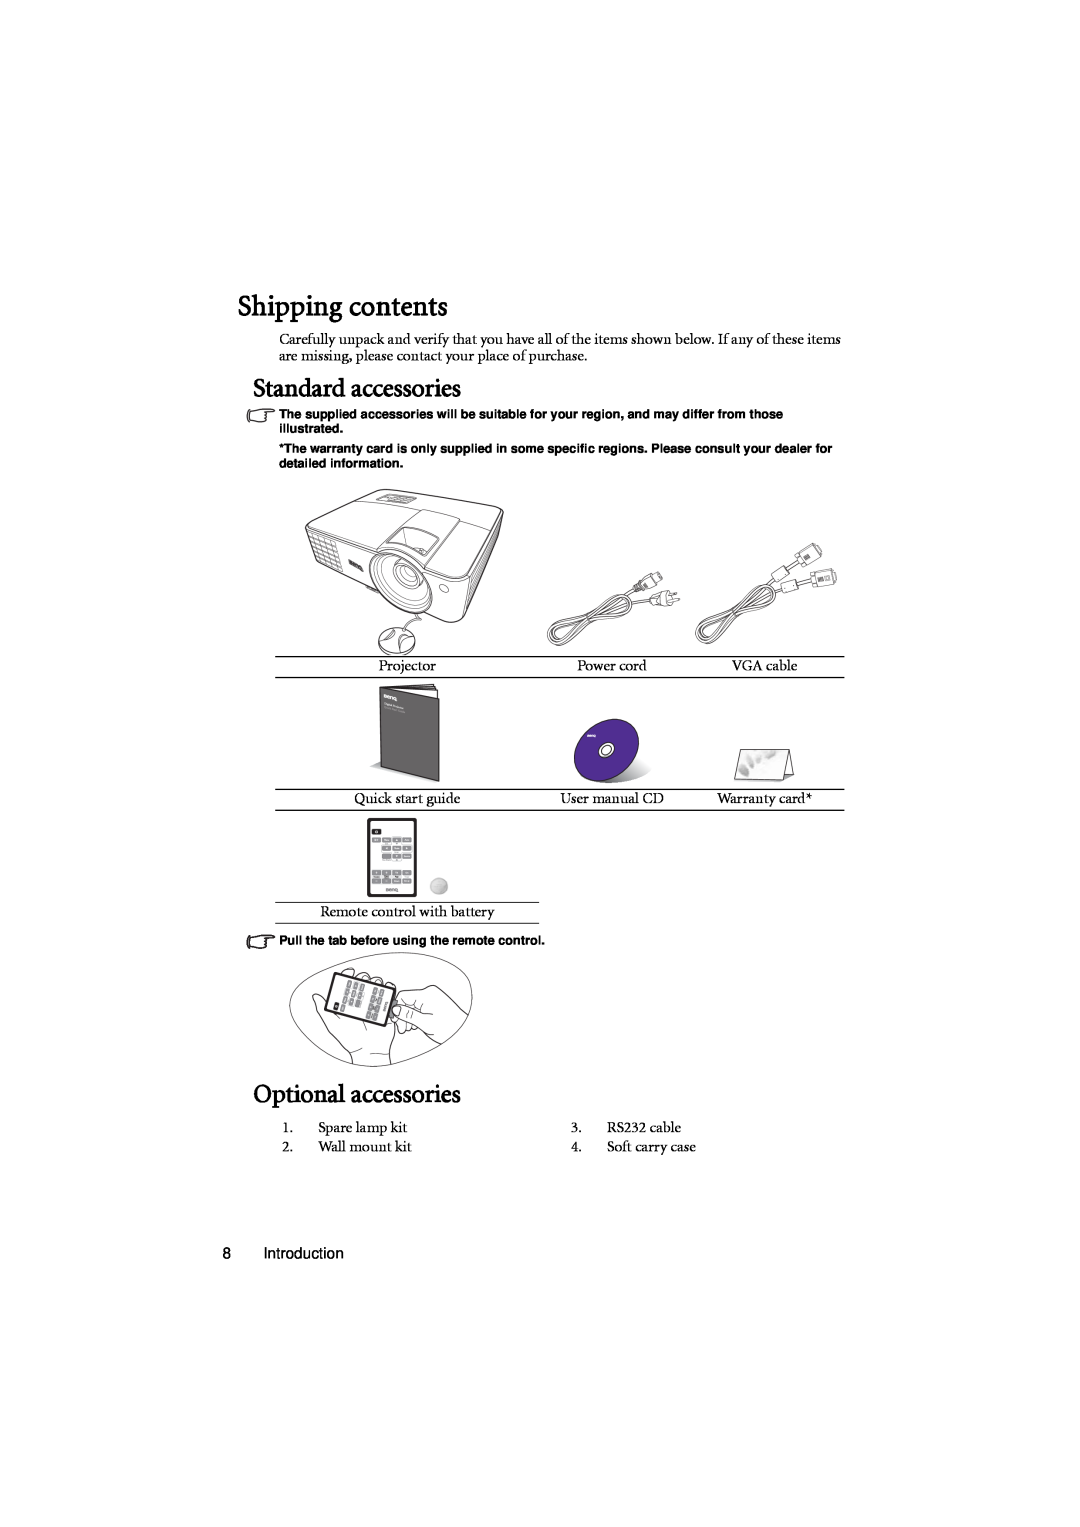 BenQ MX701 user manual Shipping contents, Standard accessories, Optional accessories 